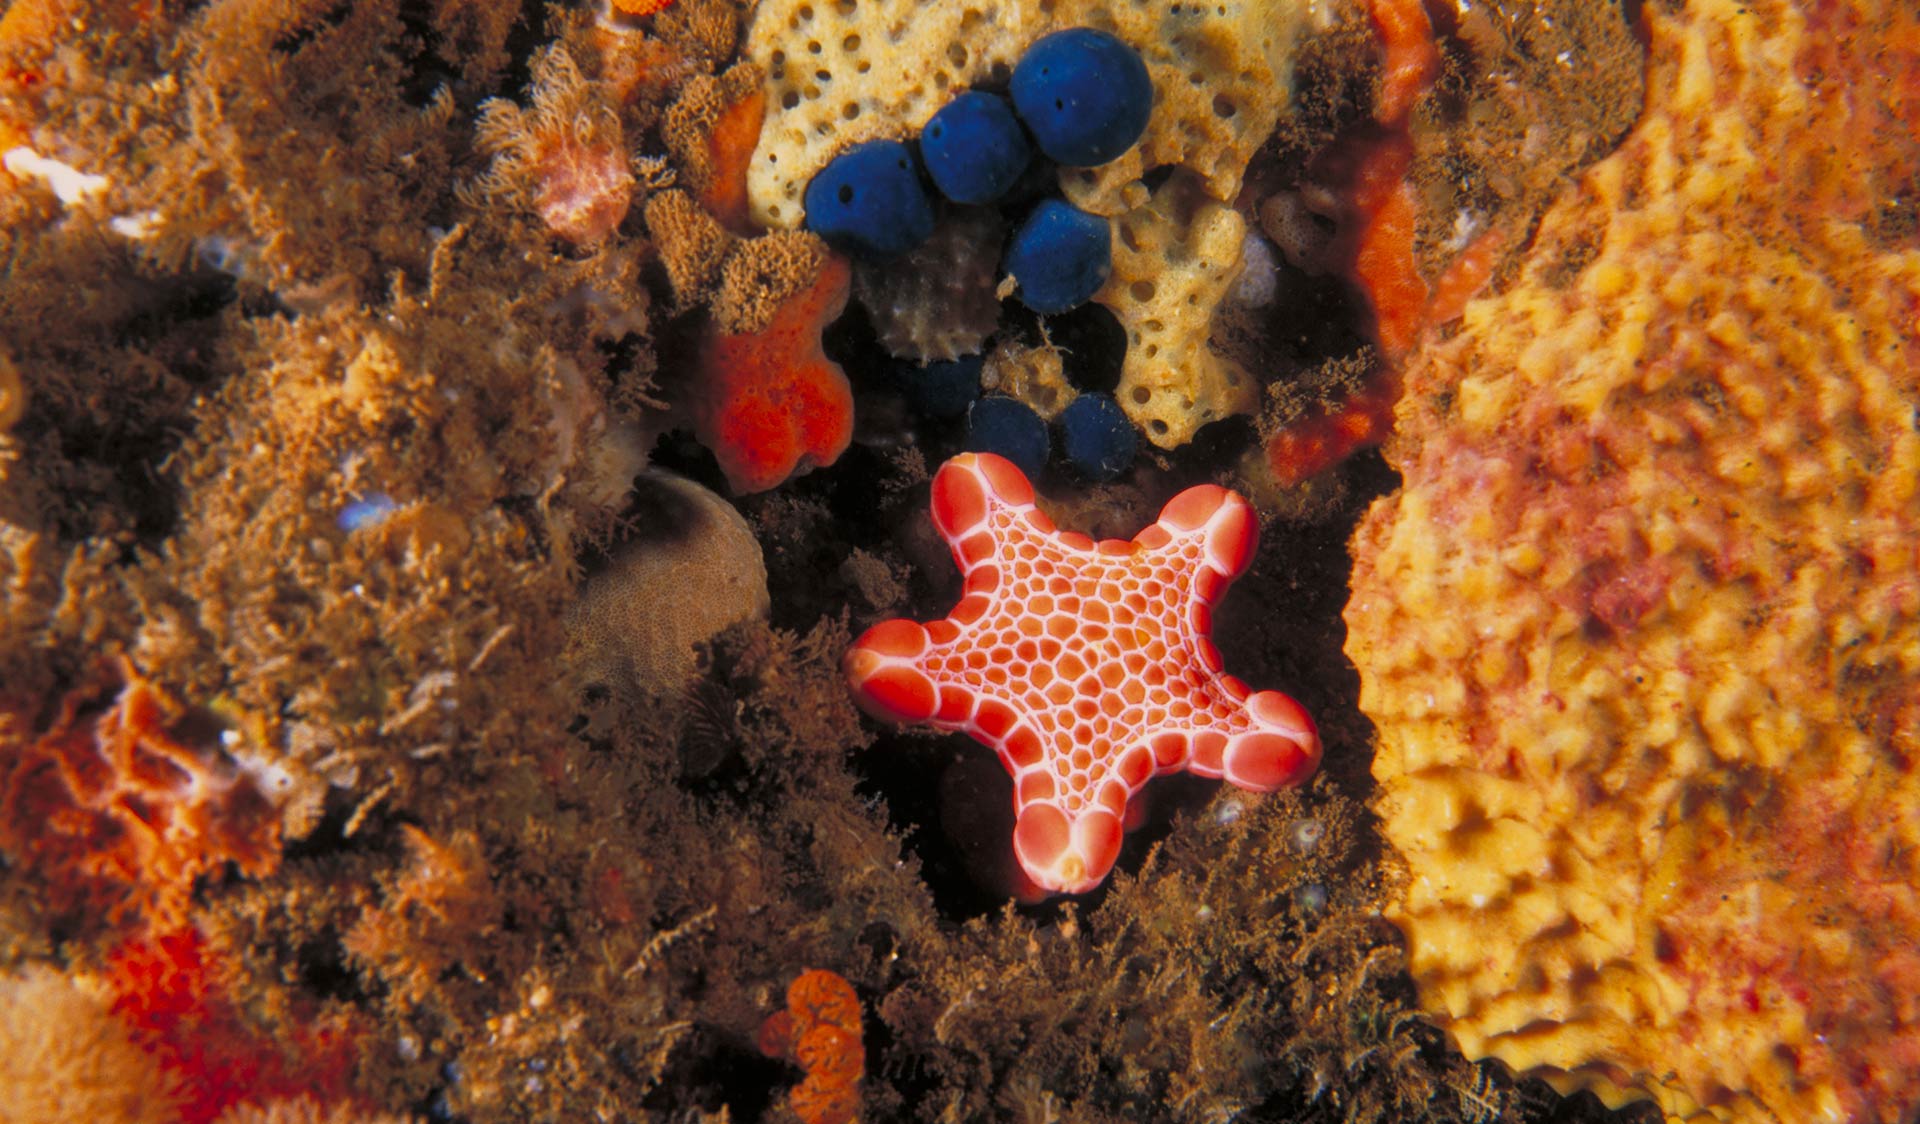 Biscuit Sea Star